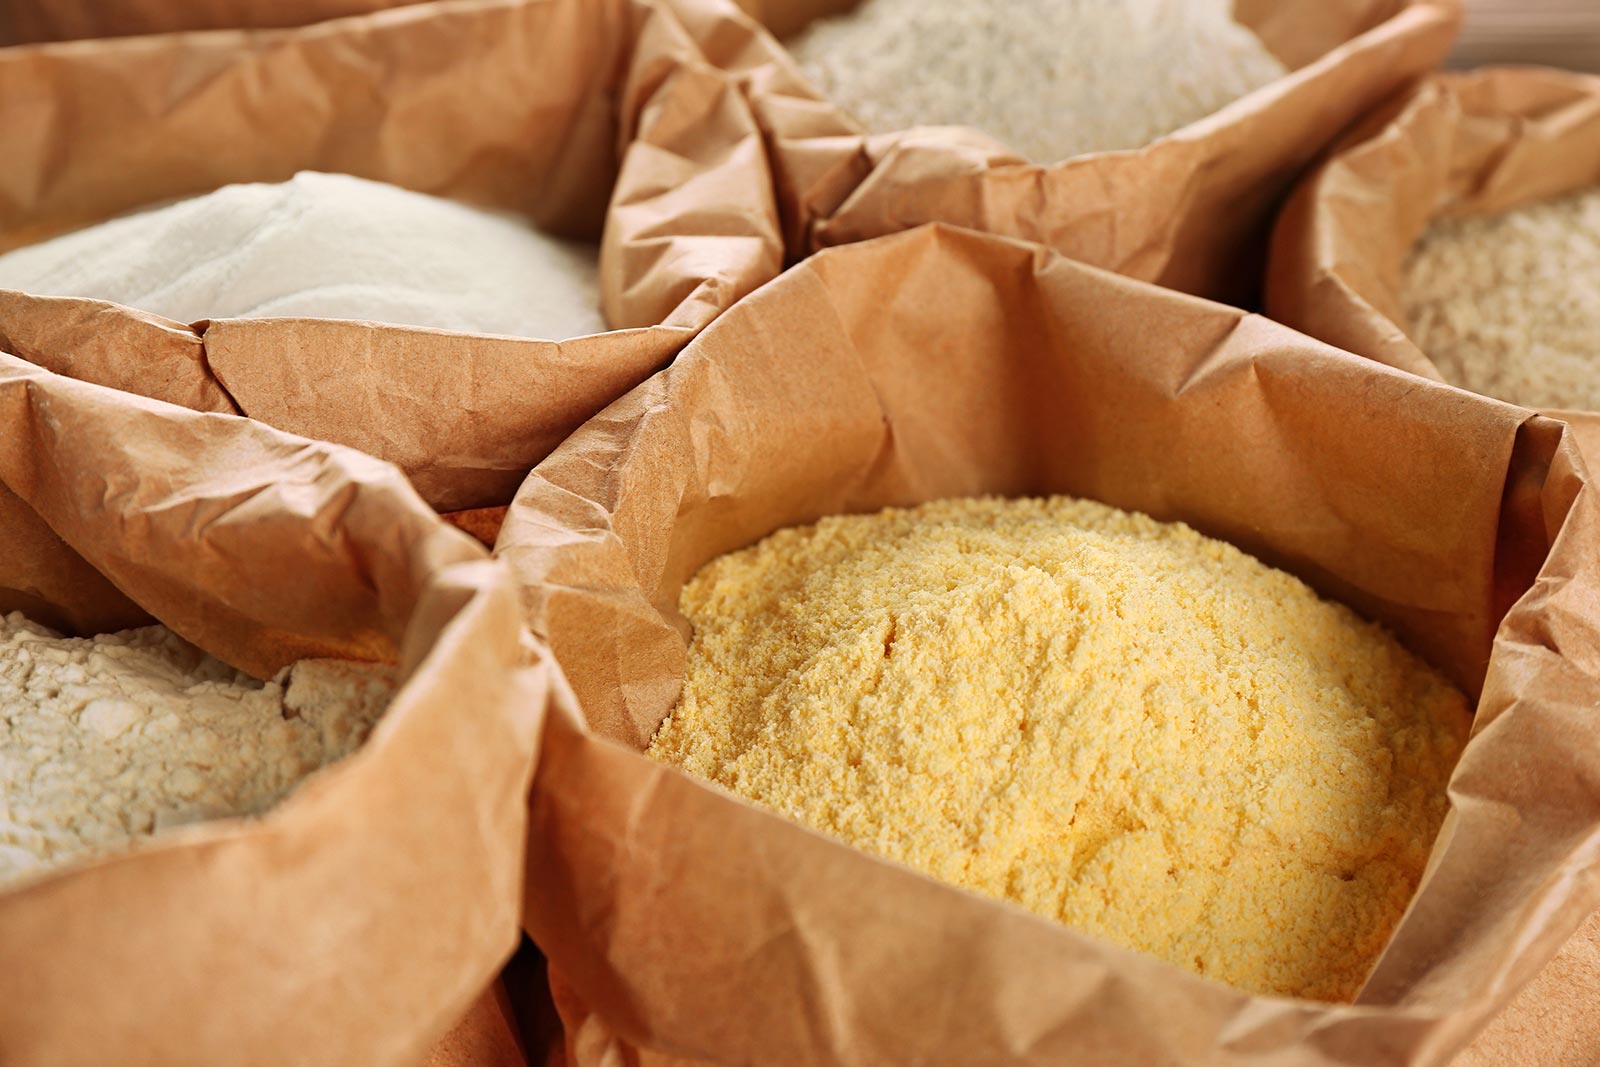 Cultivation of different types of grains, milling, packaging, and packaging of flour 